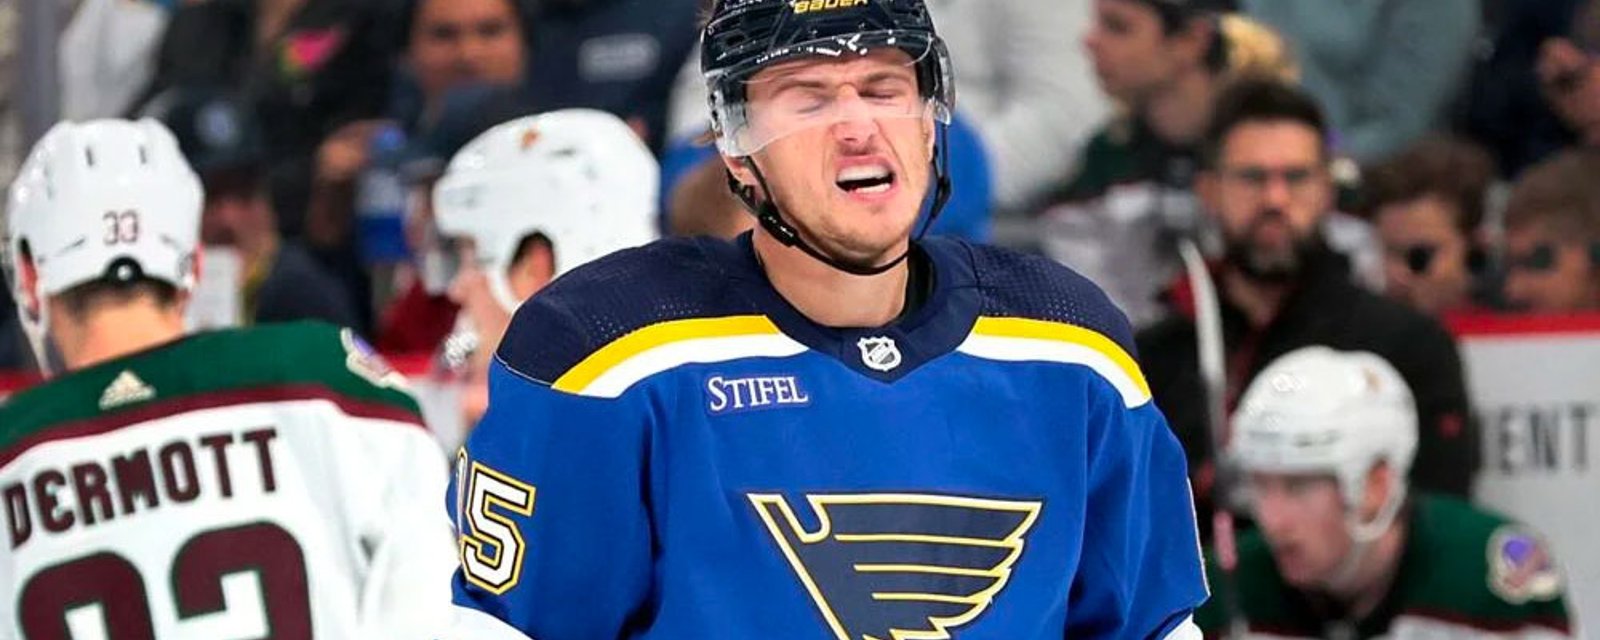 Breaking: It's official, Jakub Vrana is done with the Blues